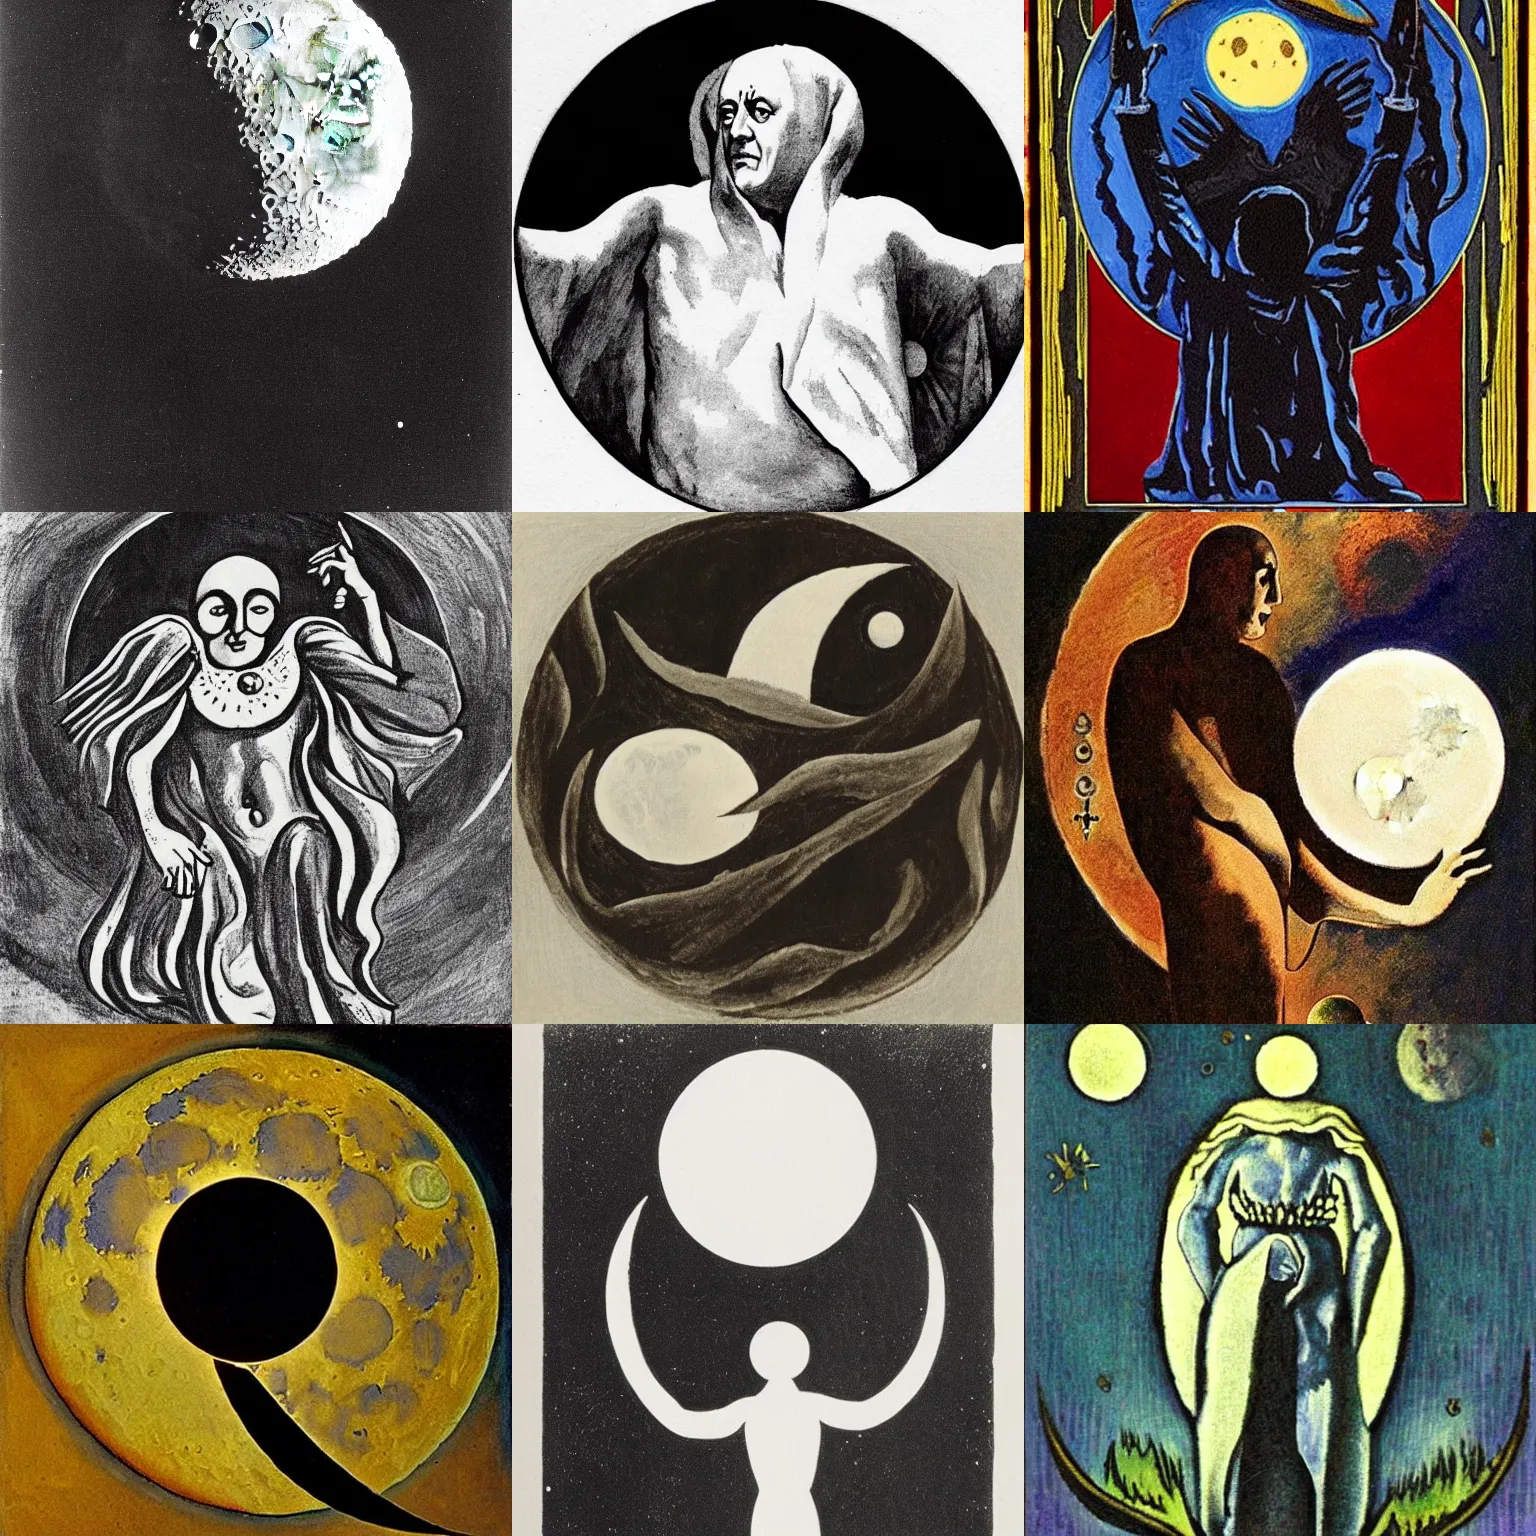 Prompt: the moon by aleister crowley